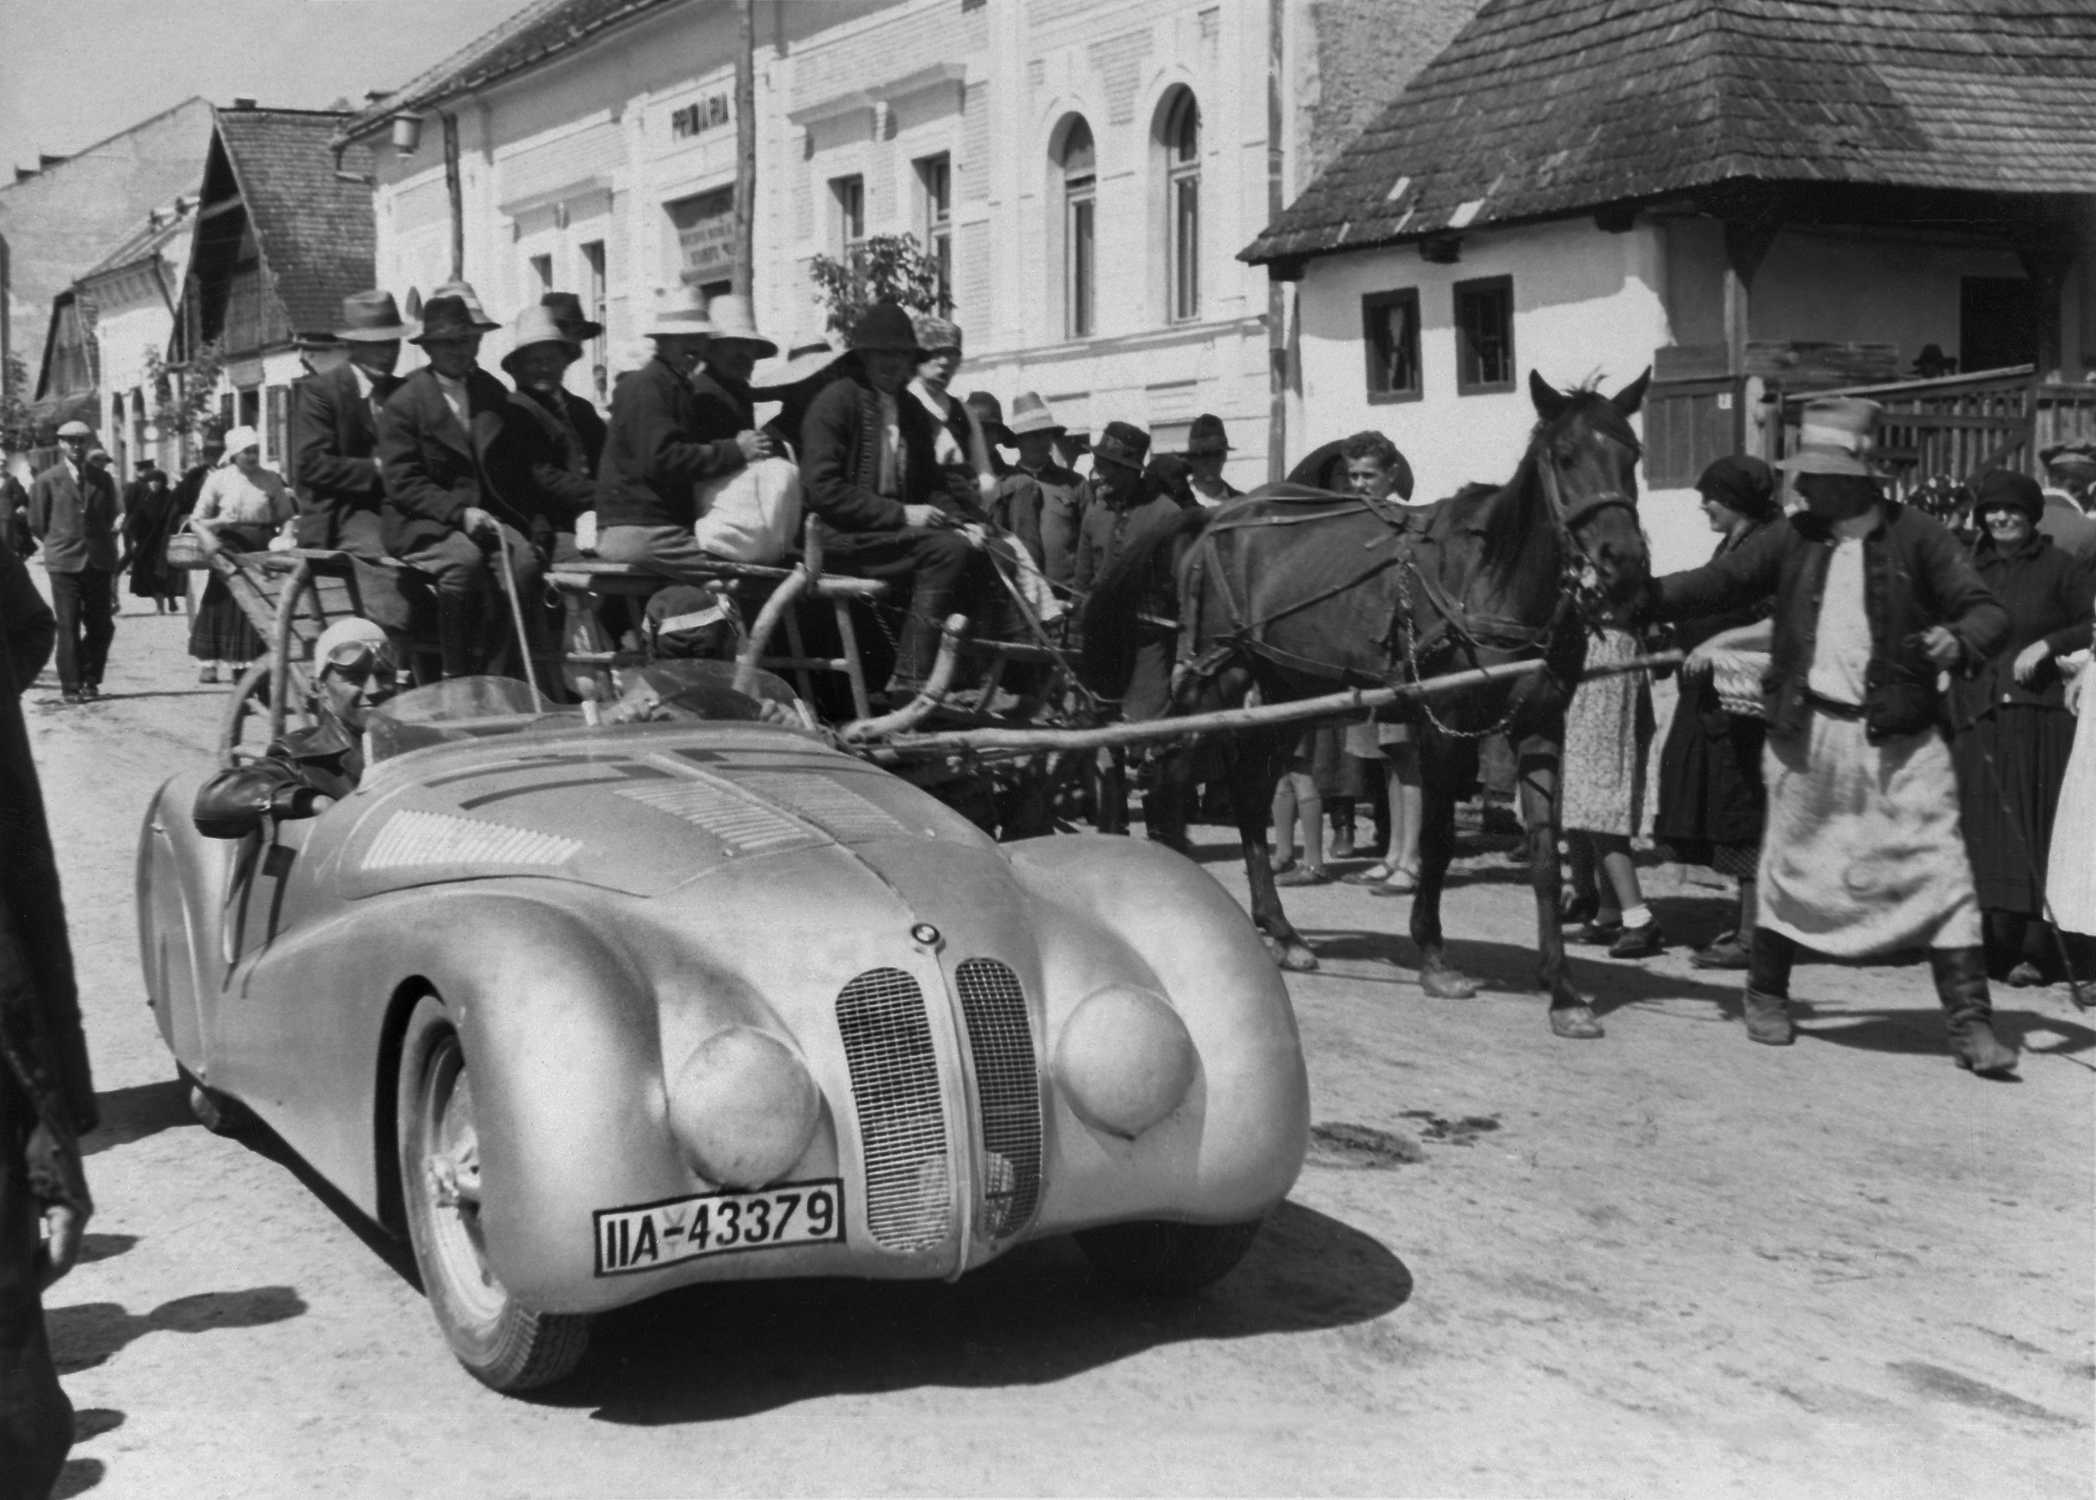 Briem in the BMW 328 Mille Miglia Roadster on the way to the Rumanian Grand Prix,
Brasov (Kronstadt), 1940 (07/2020)